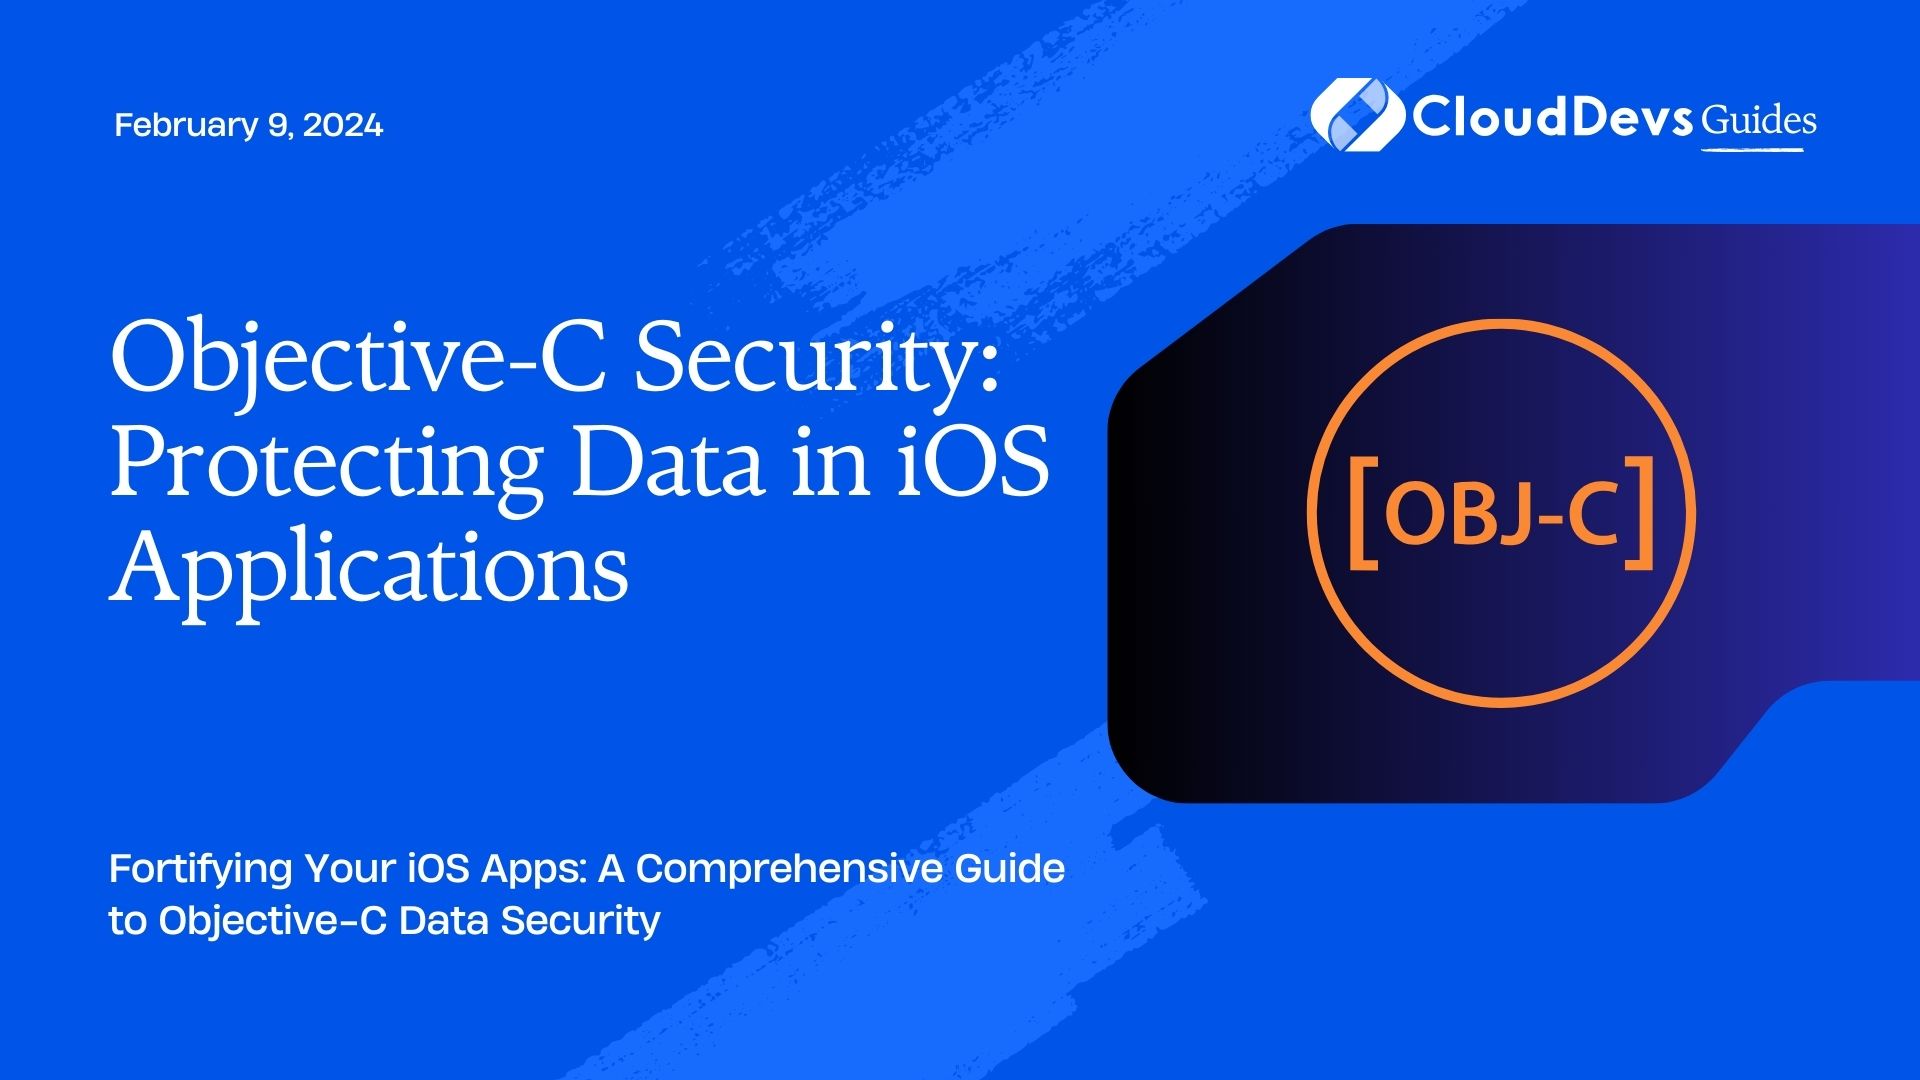 Objective-C Security: Protecting Data in iOS Applications